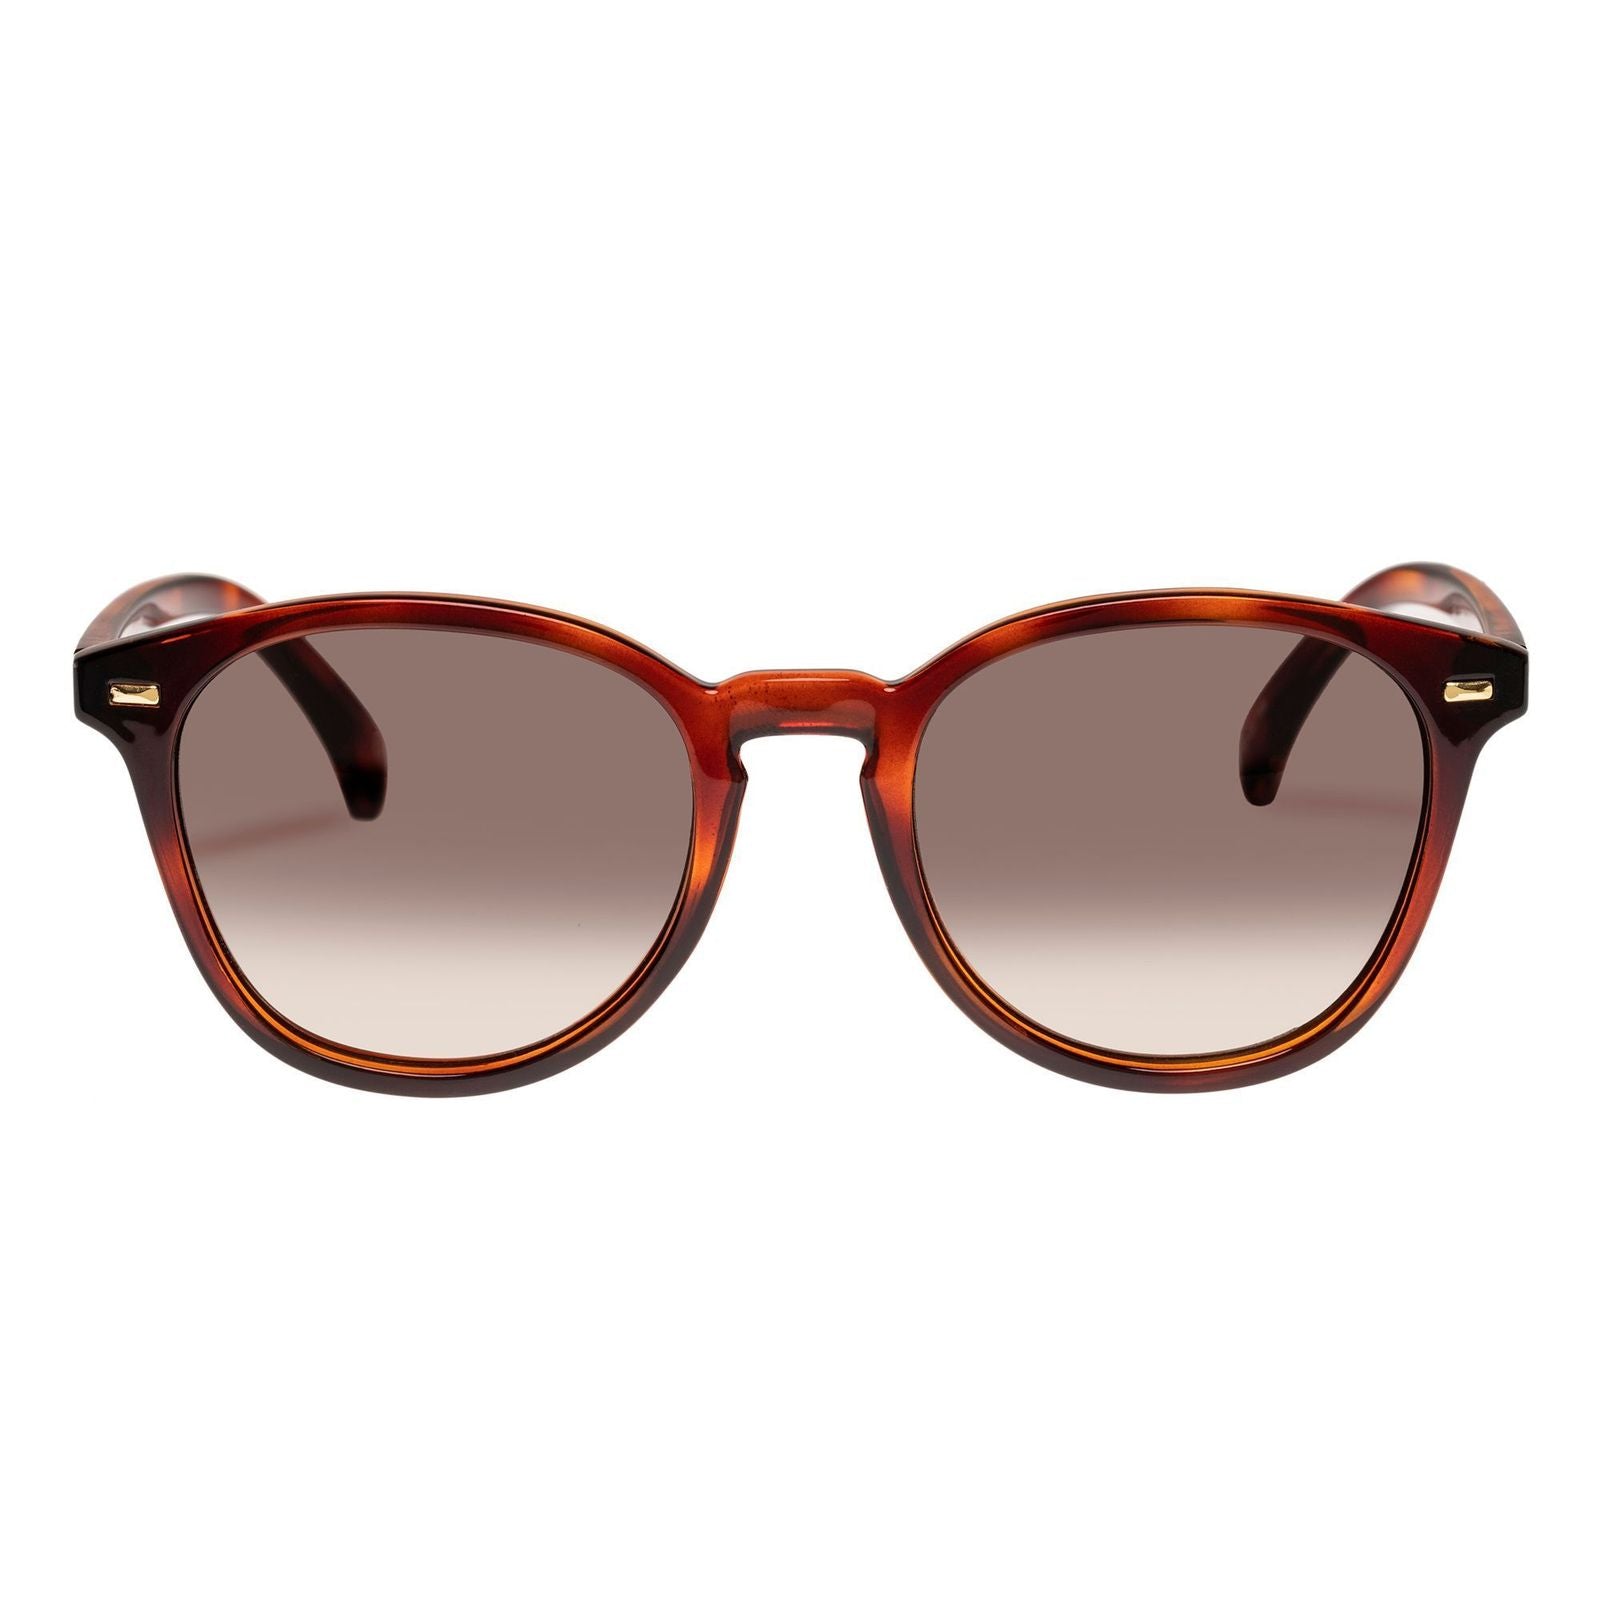 Le Specs | Bandwagon | Toffee Tort